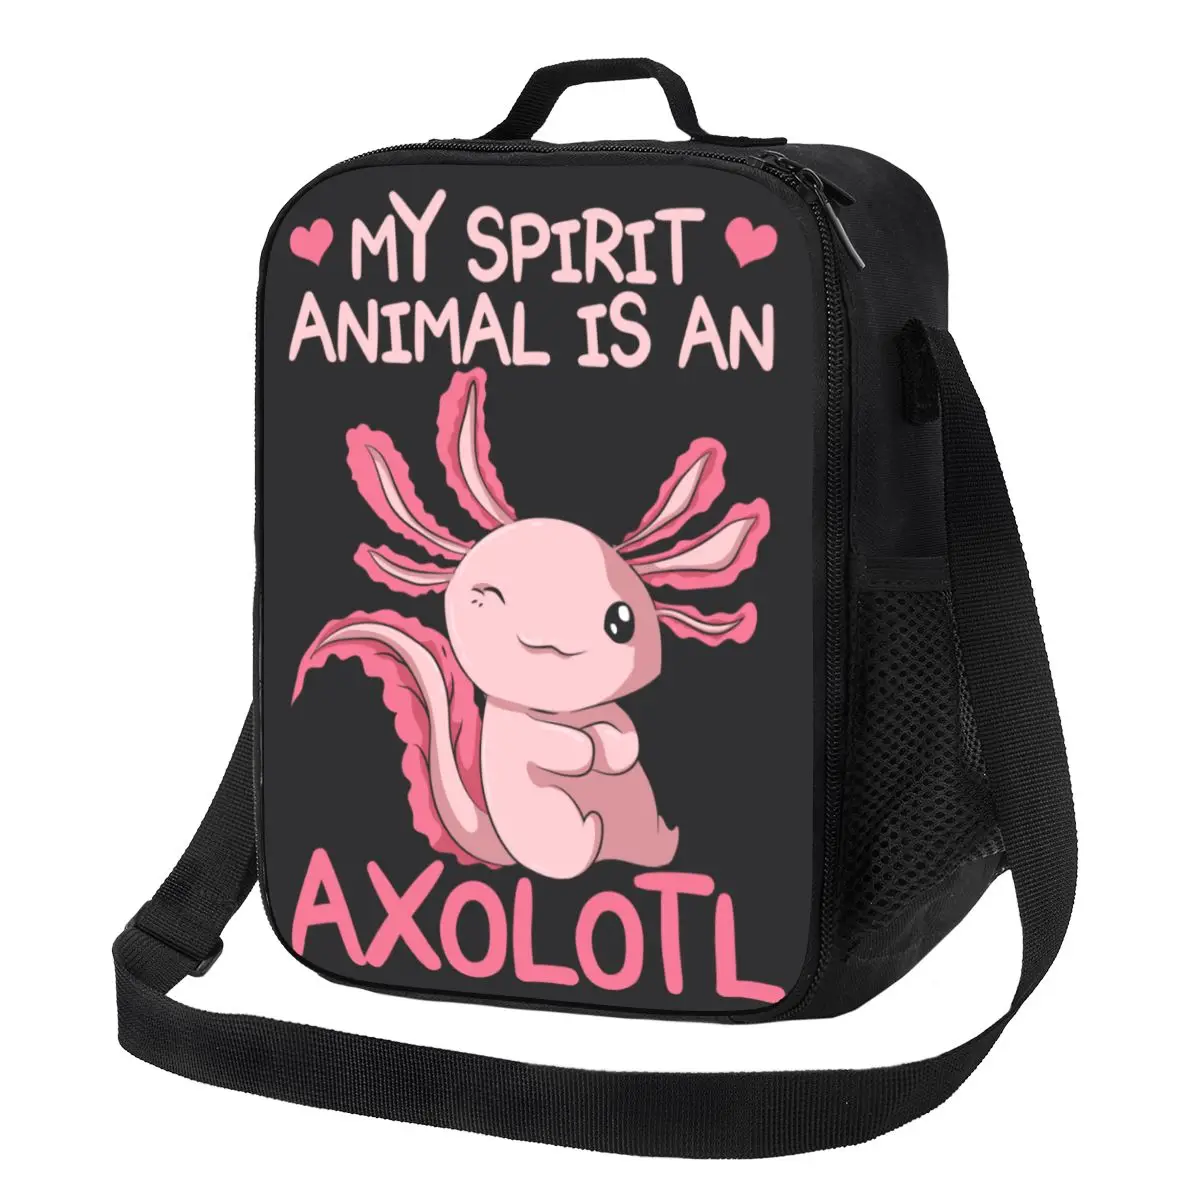 

My Spirit Animal Is An Axolotl Portable Lunch Box Women Salamander Animal Thermal Cooler Food Insulated Lunch Bag School Student